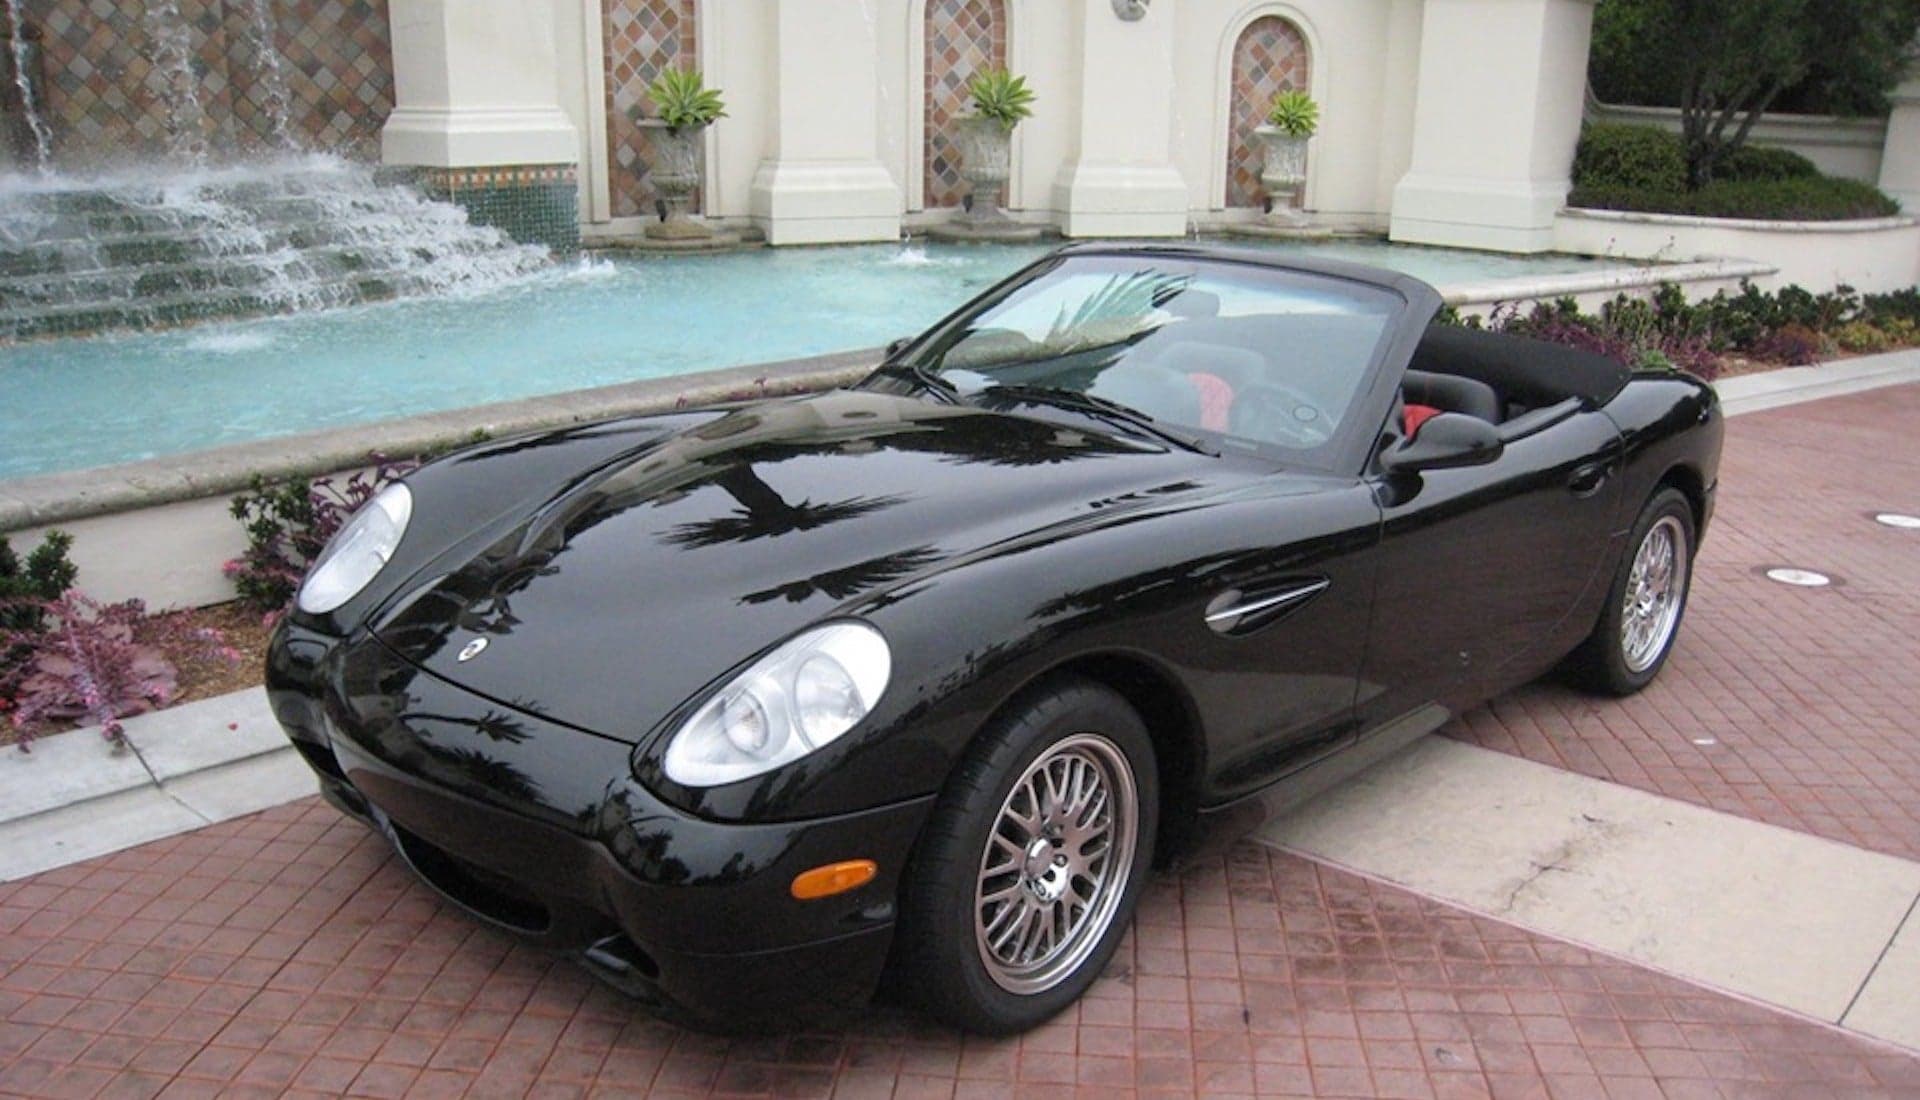 For $43,500 This 2002 Panoz Esperante Convertible Could Make You Feel Like a Million Bucks